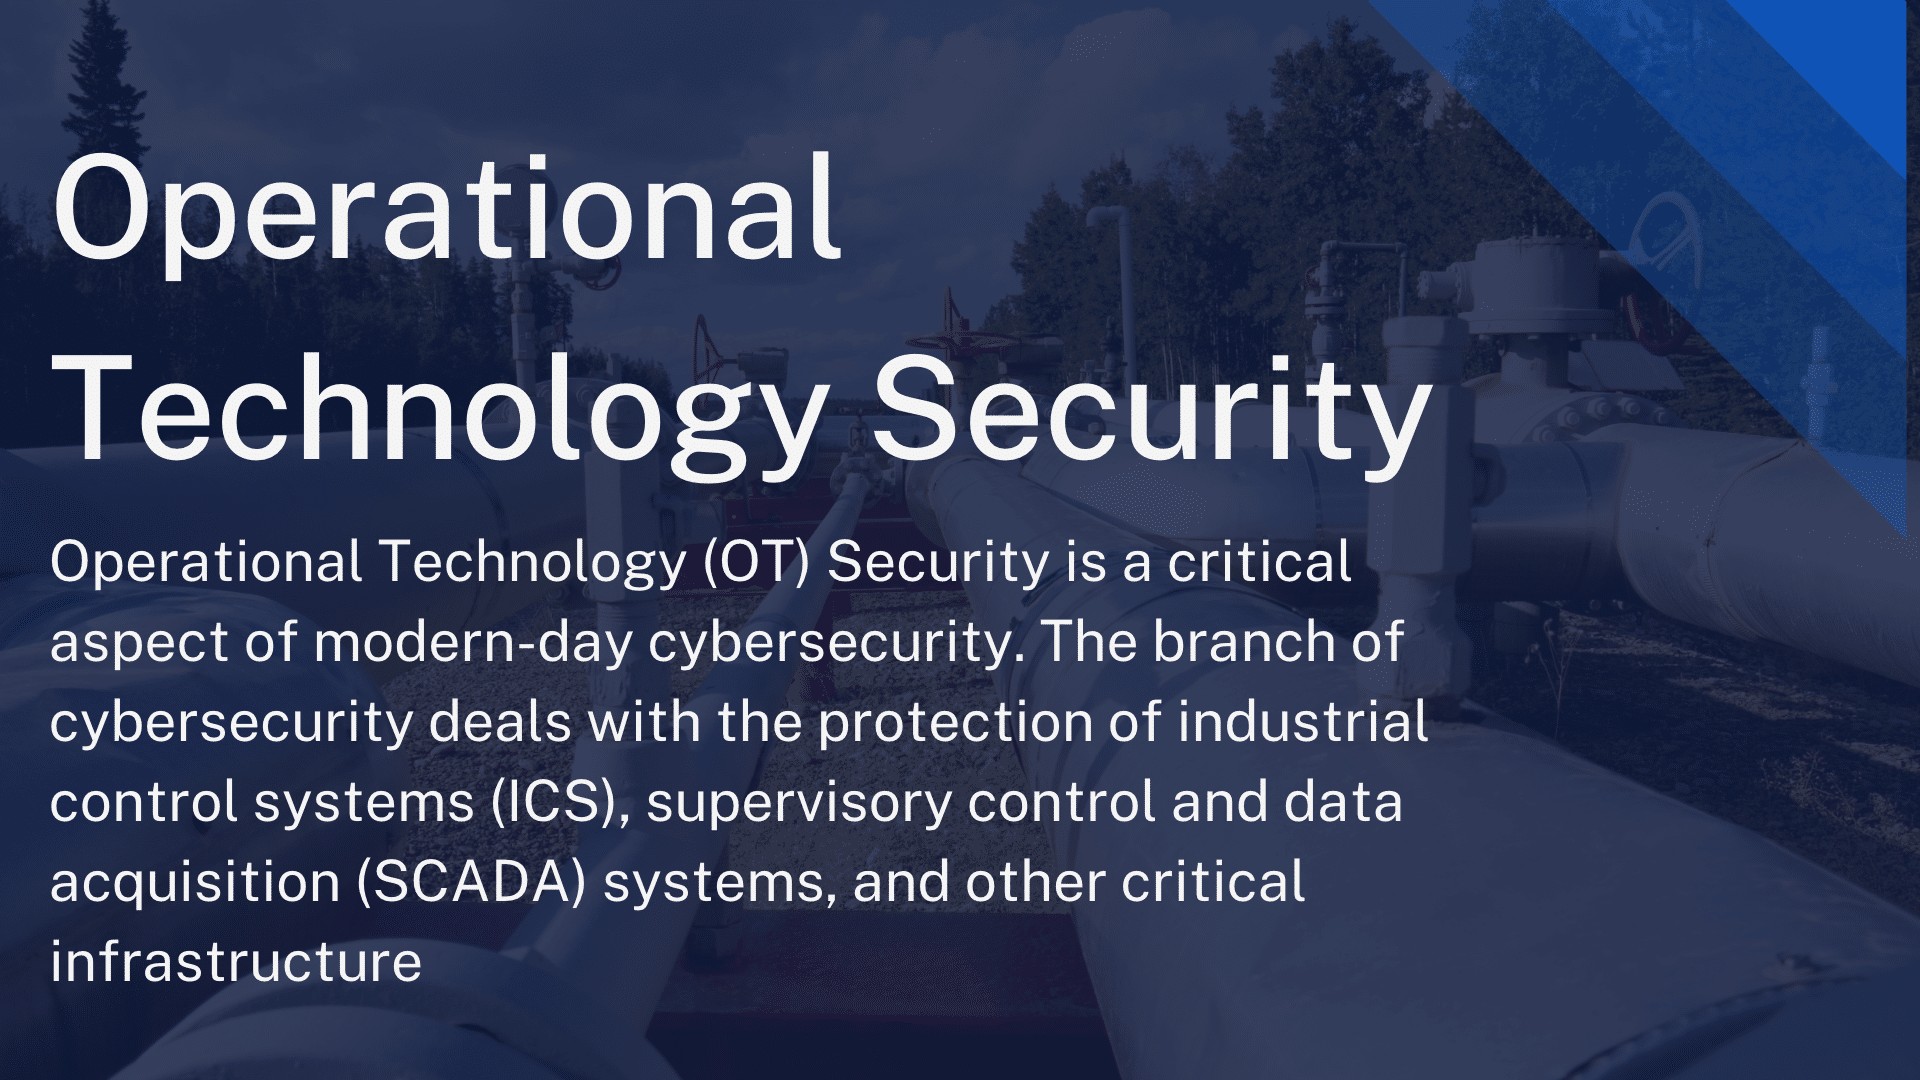 Operational Technology Security